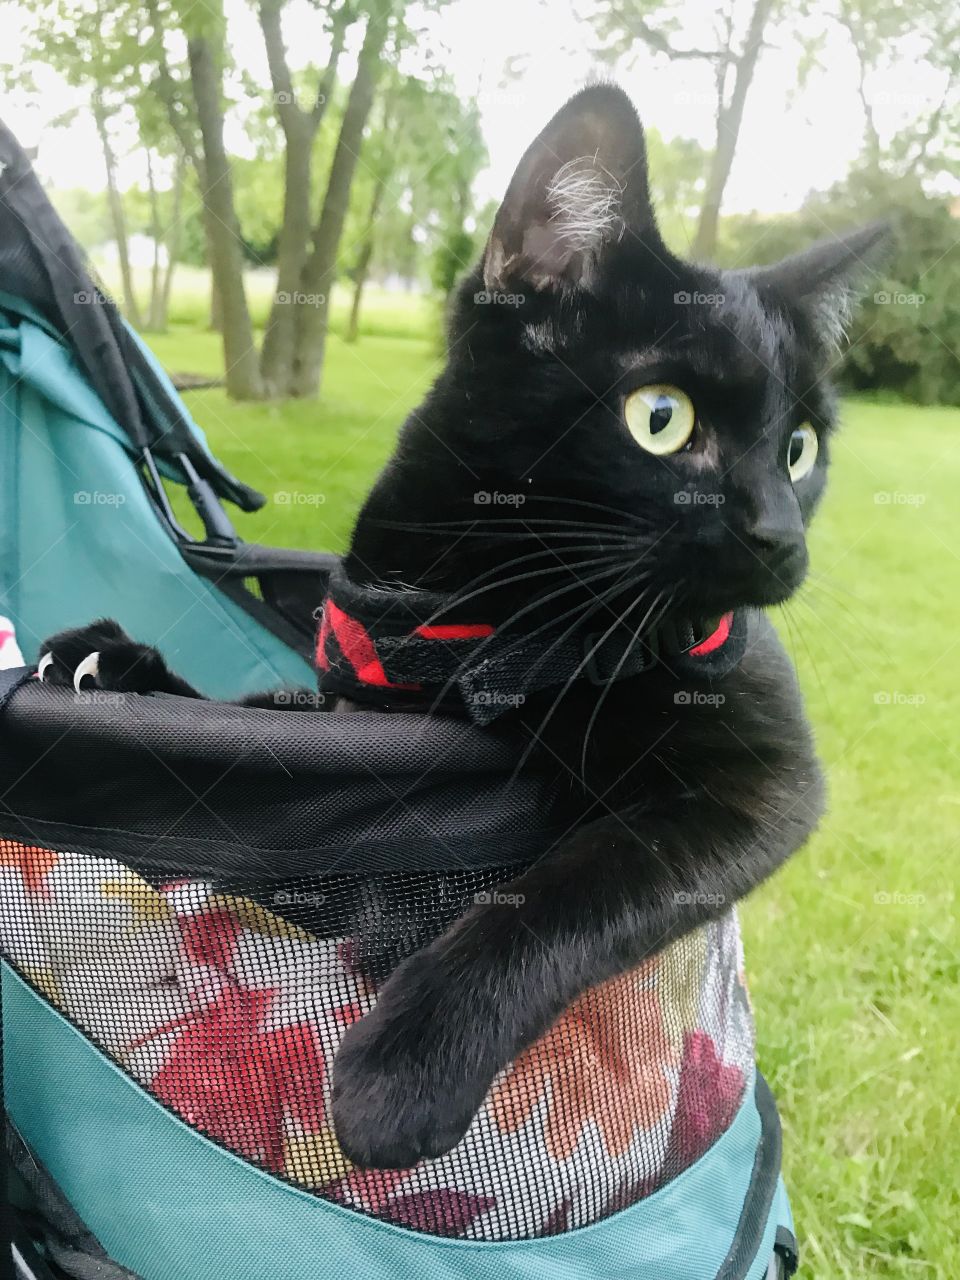 Darling little black kitty sitting in her stroller with her harness on ready for an evening ride!! 